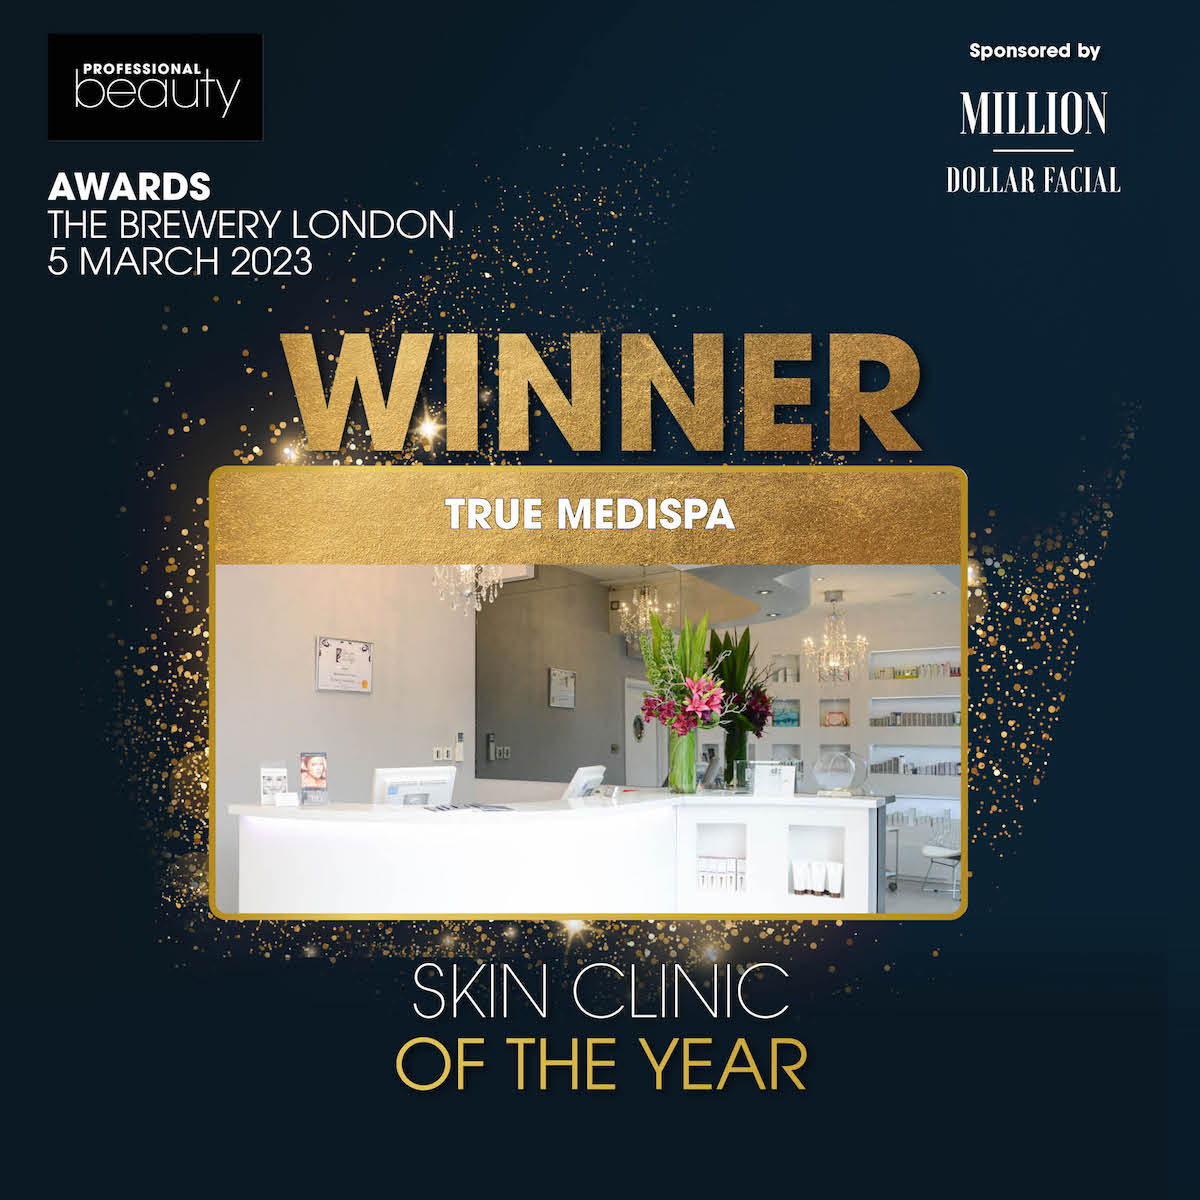 It’s Official! True Medispa Voted ‘Skin Clinic of the Year’ 2023